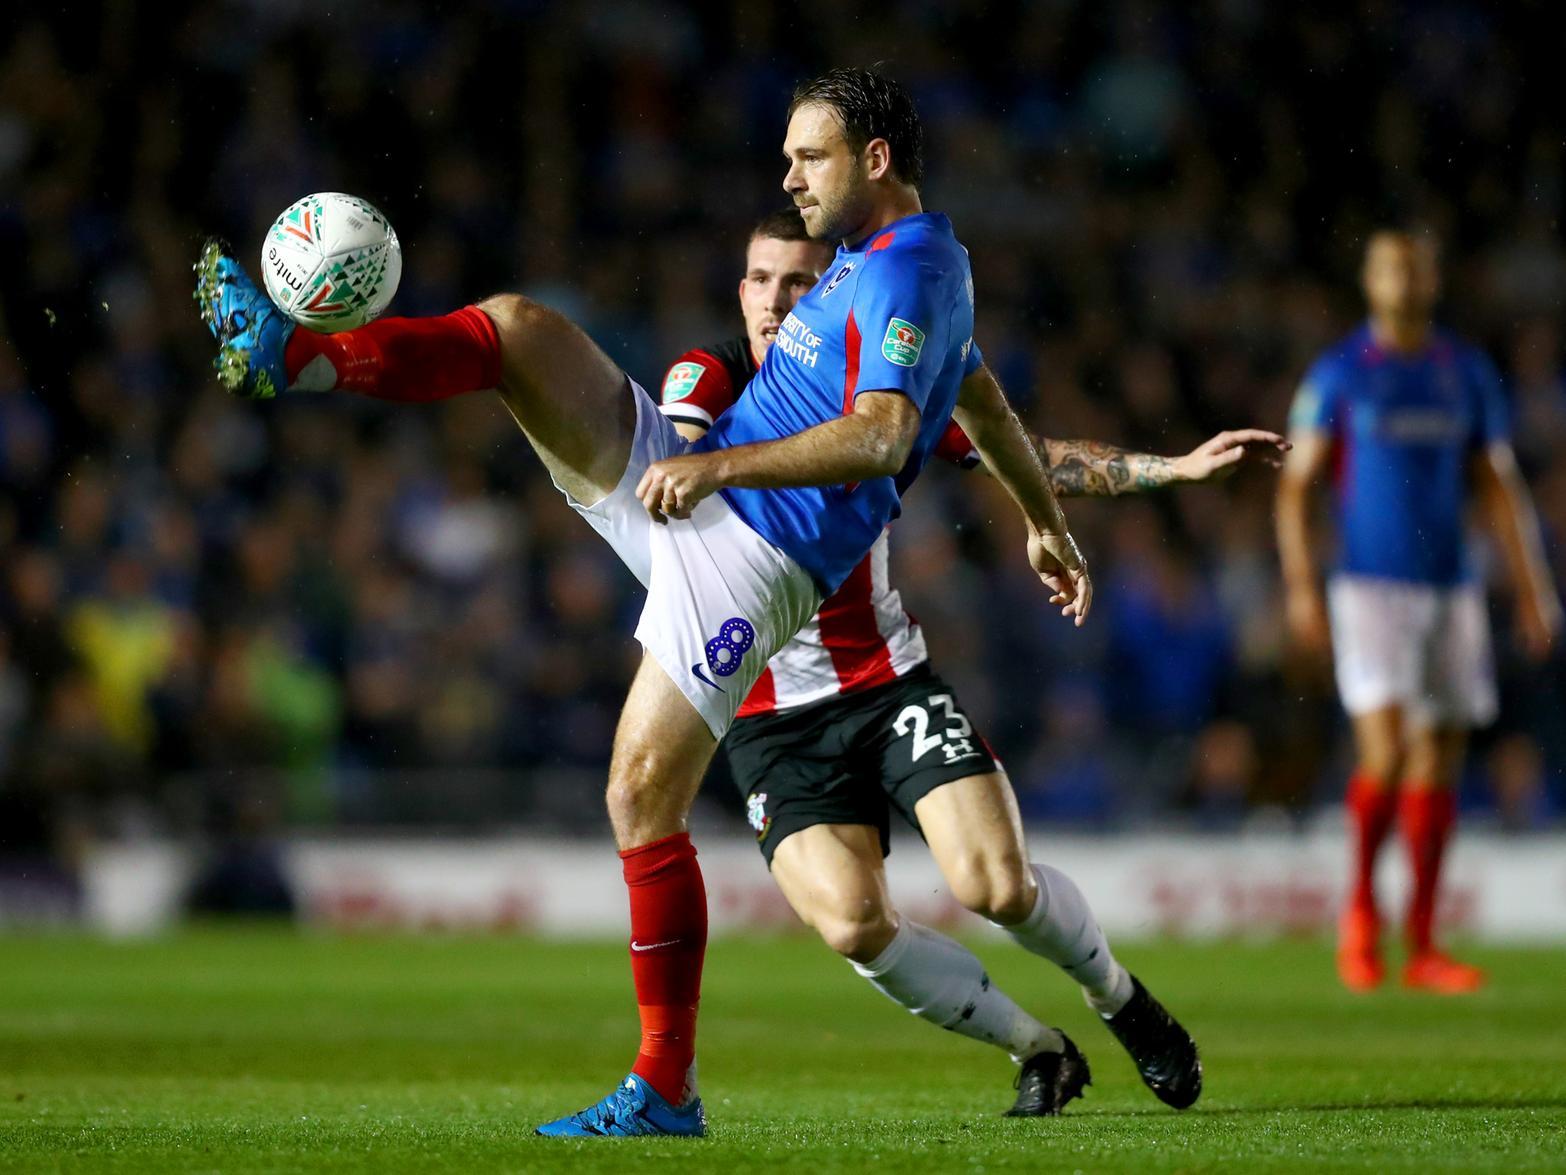 Pompeys captain has been linked with a move away from Fratton Park but wants to stay having featured just 11 times in League One so far this campaign. The striker has netted 42 times in 99 appearances.